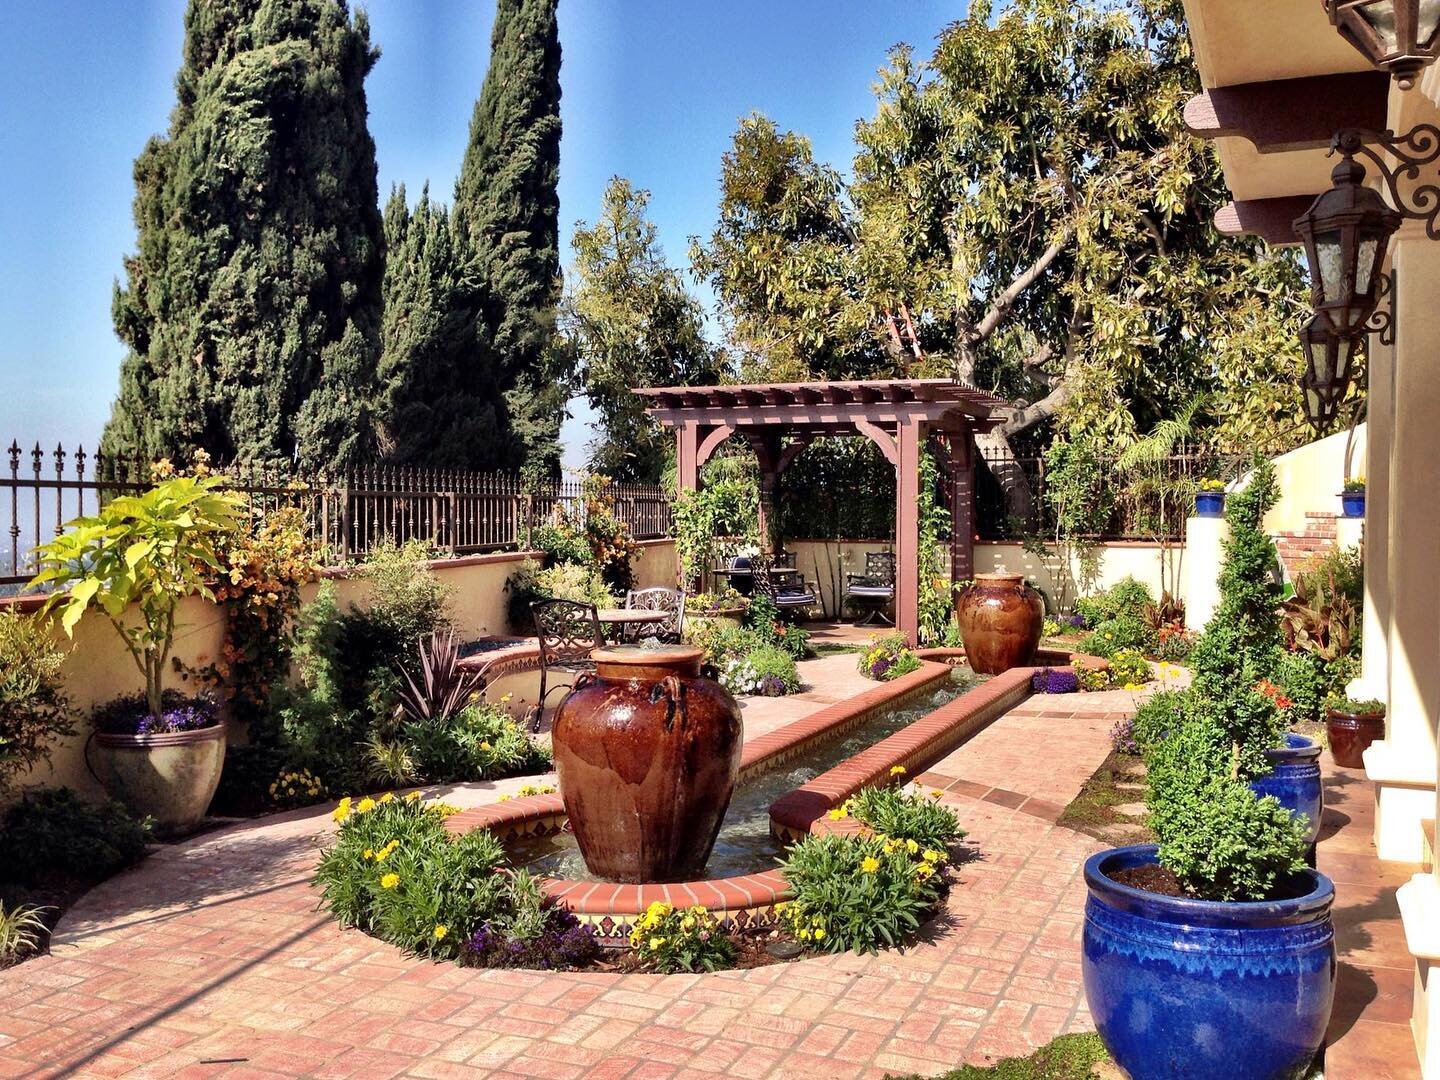 Bringing some bright colors and good vibes to your week with this Spanish style stunner! 🤩⁣
The water feature with large urns is set to run during the day and is dramatic when lit at night. The pergola provides a shady corner to relax and the small 